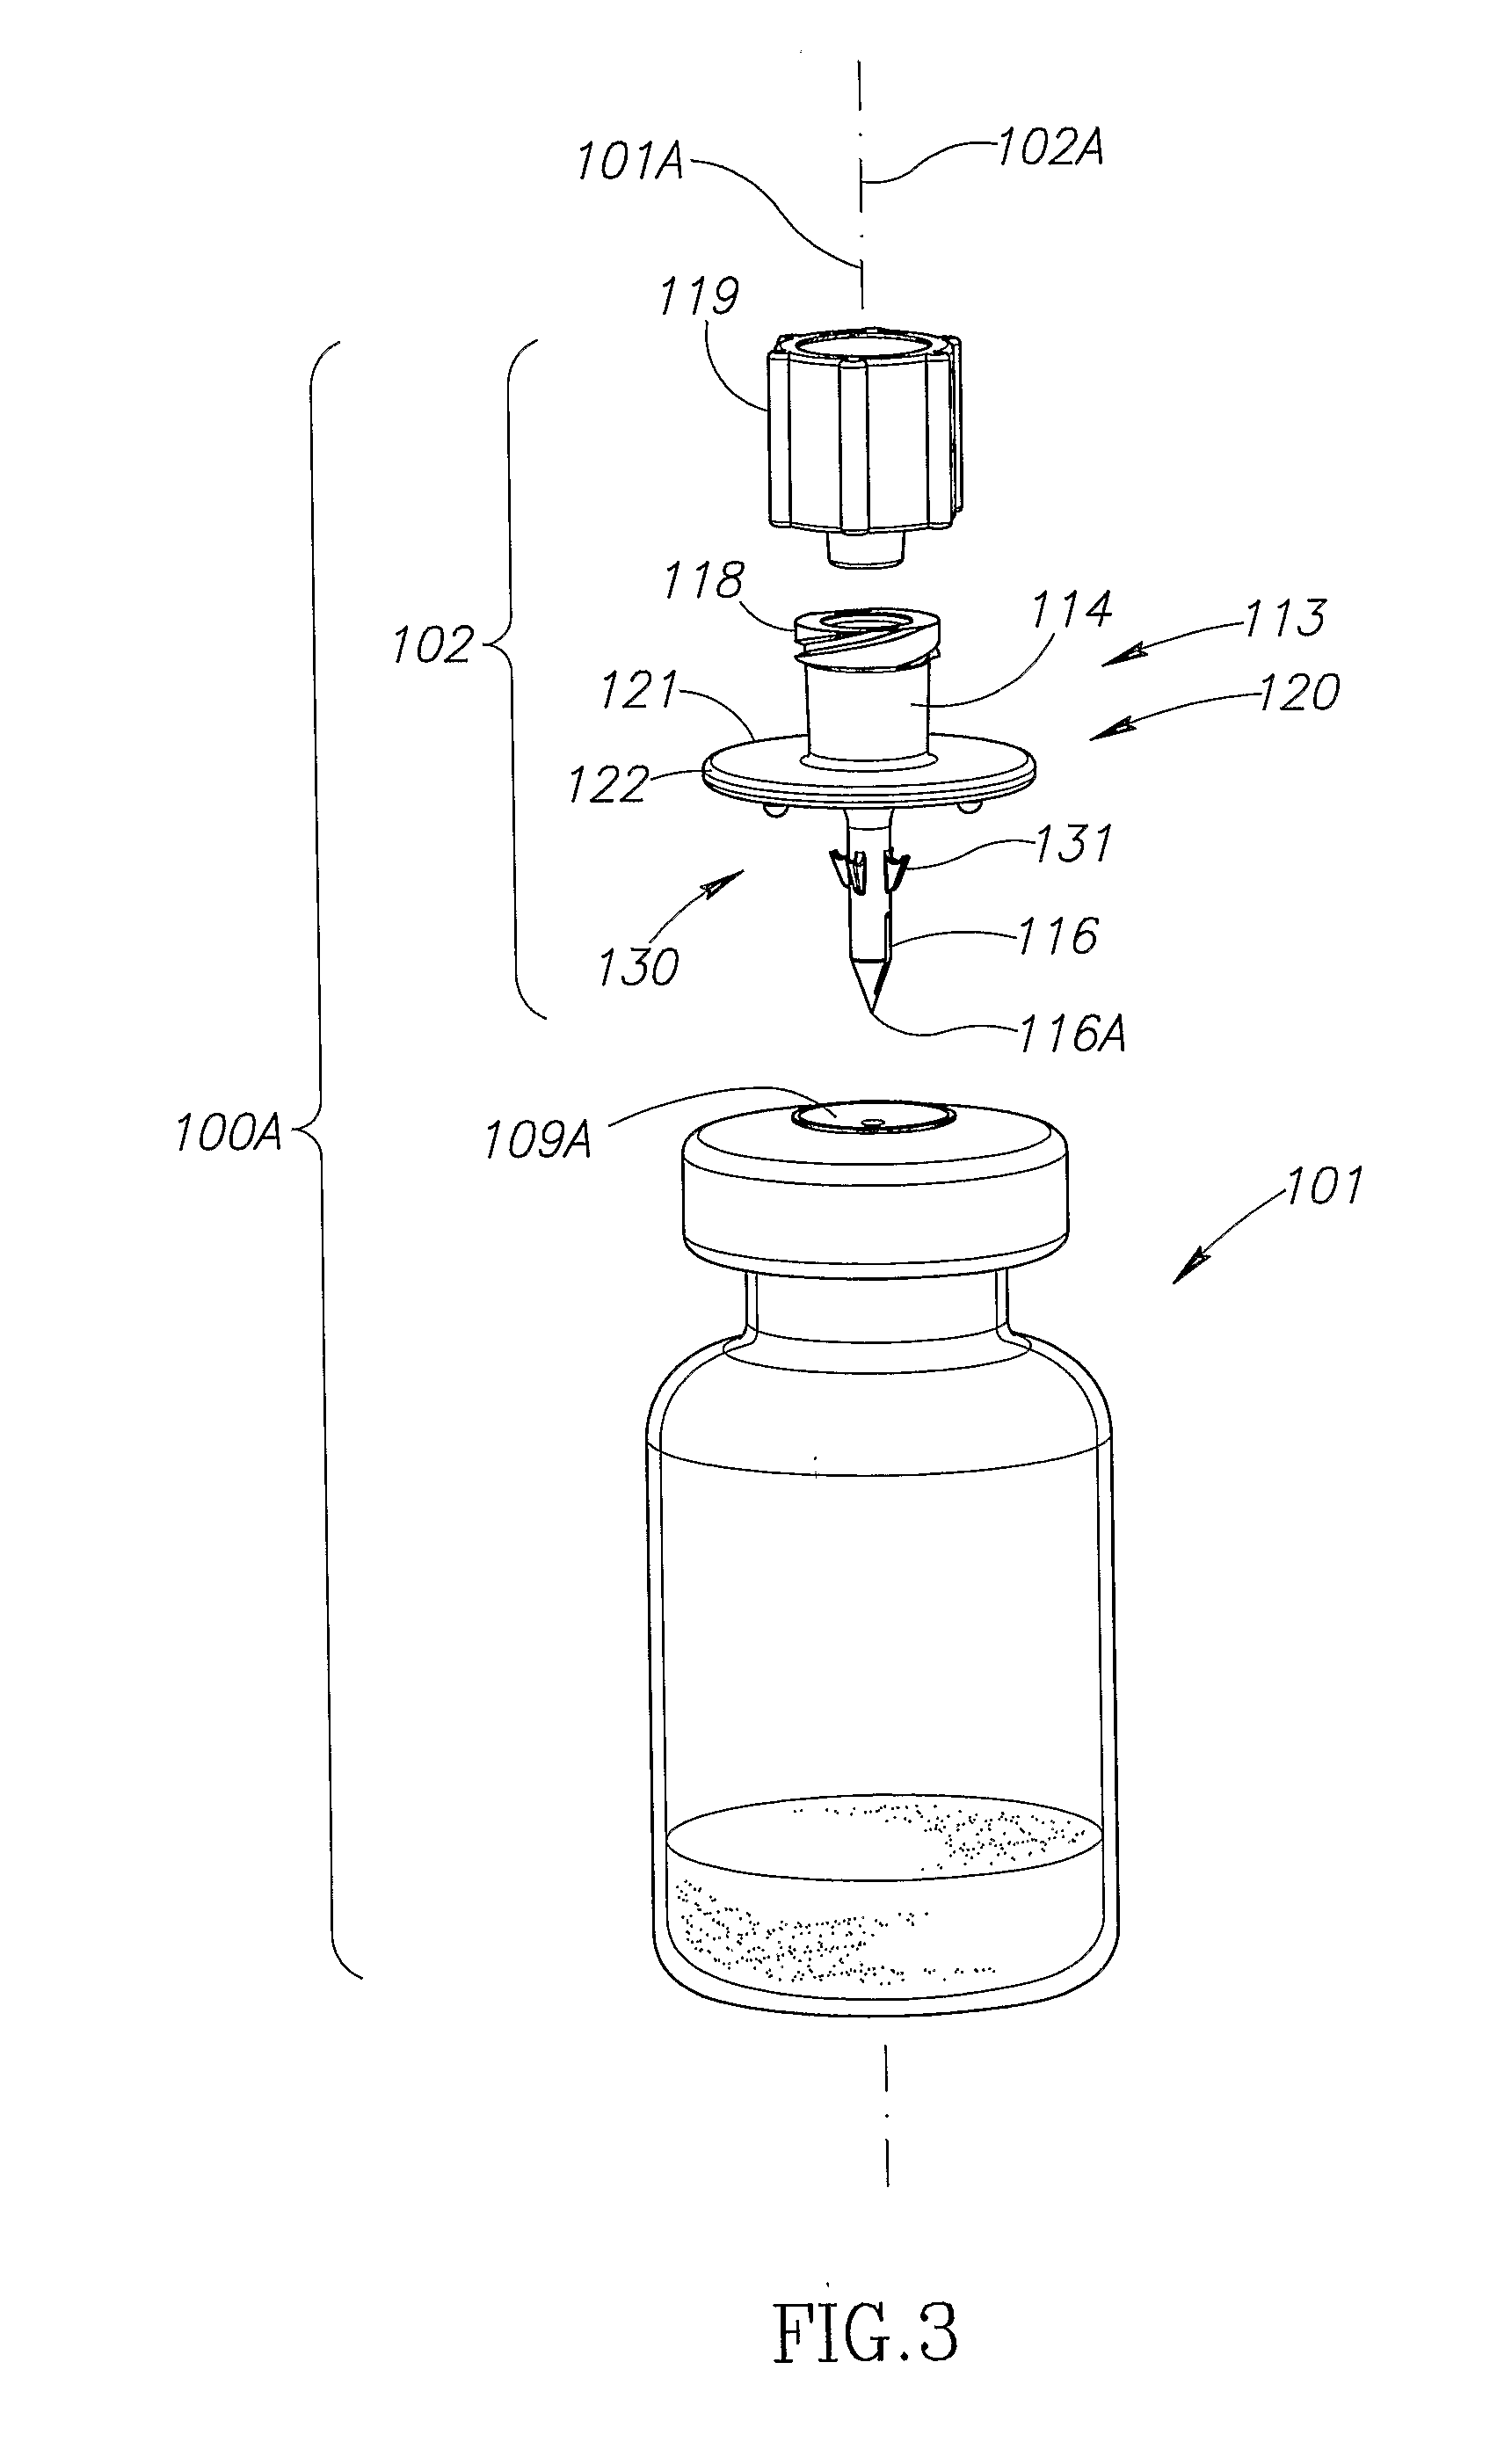 Vial assemblage with vial and pre-attached fluid transfer device